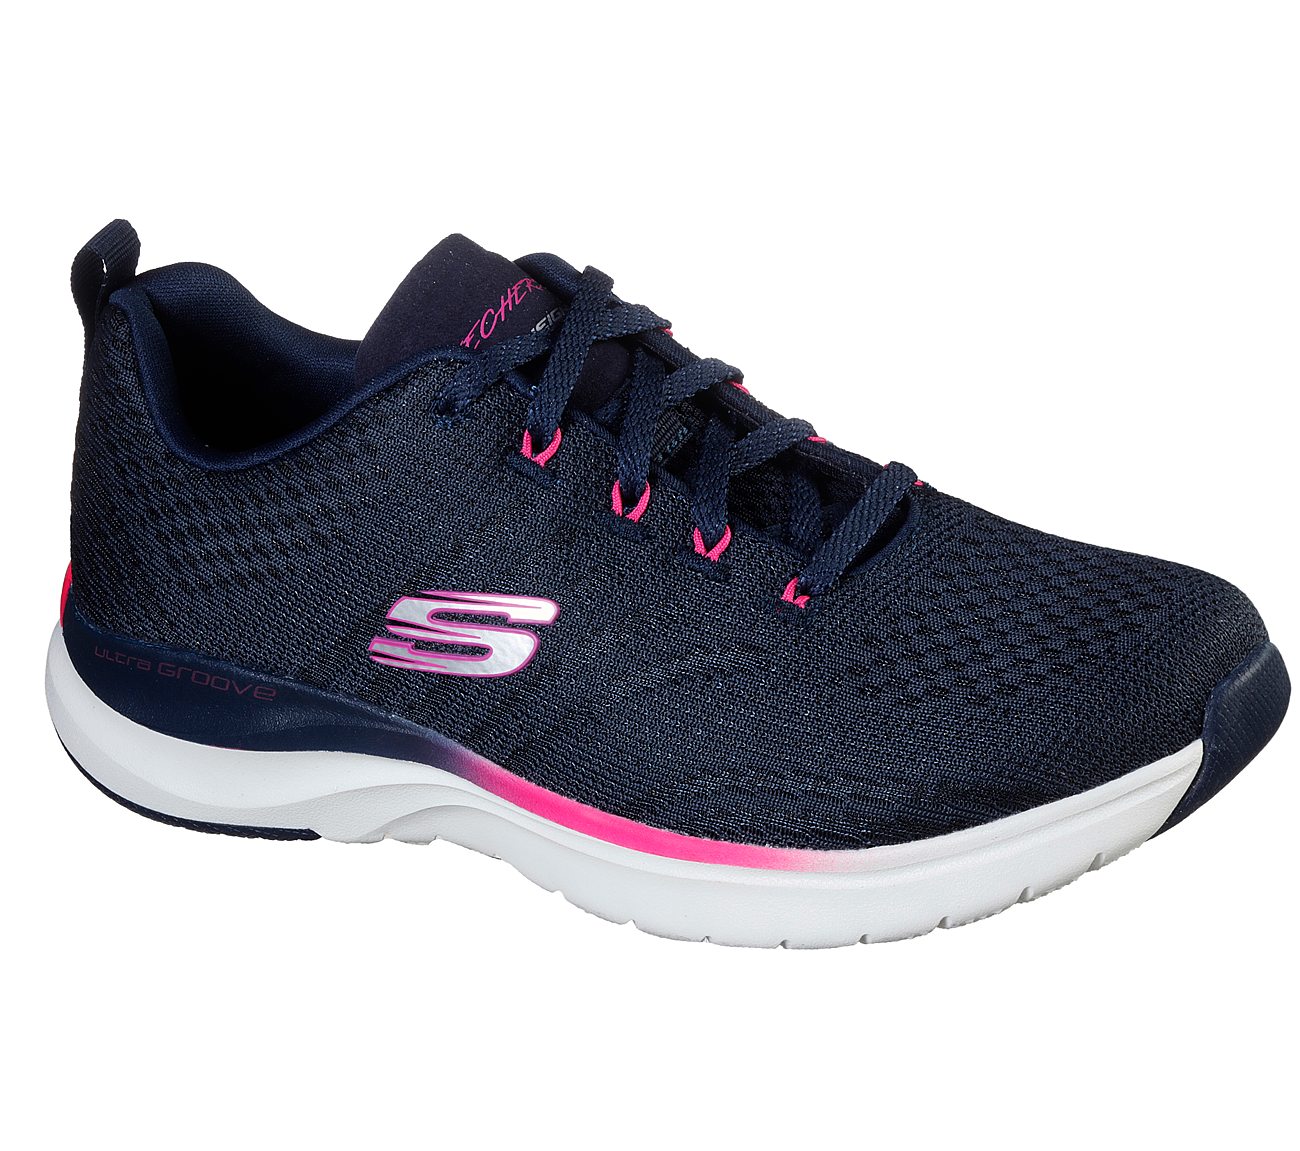 Buy Skechers ULTRA GROOVE - PURE VISION | Women